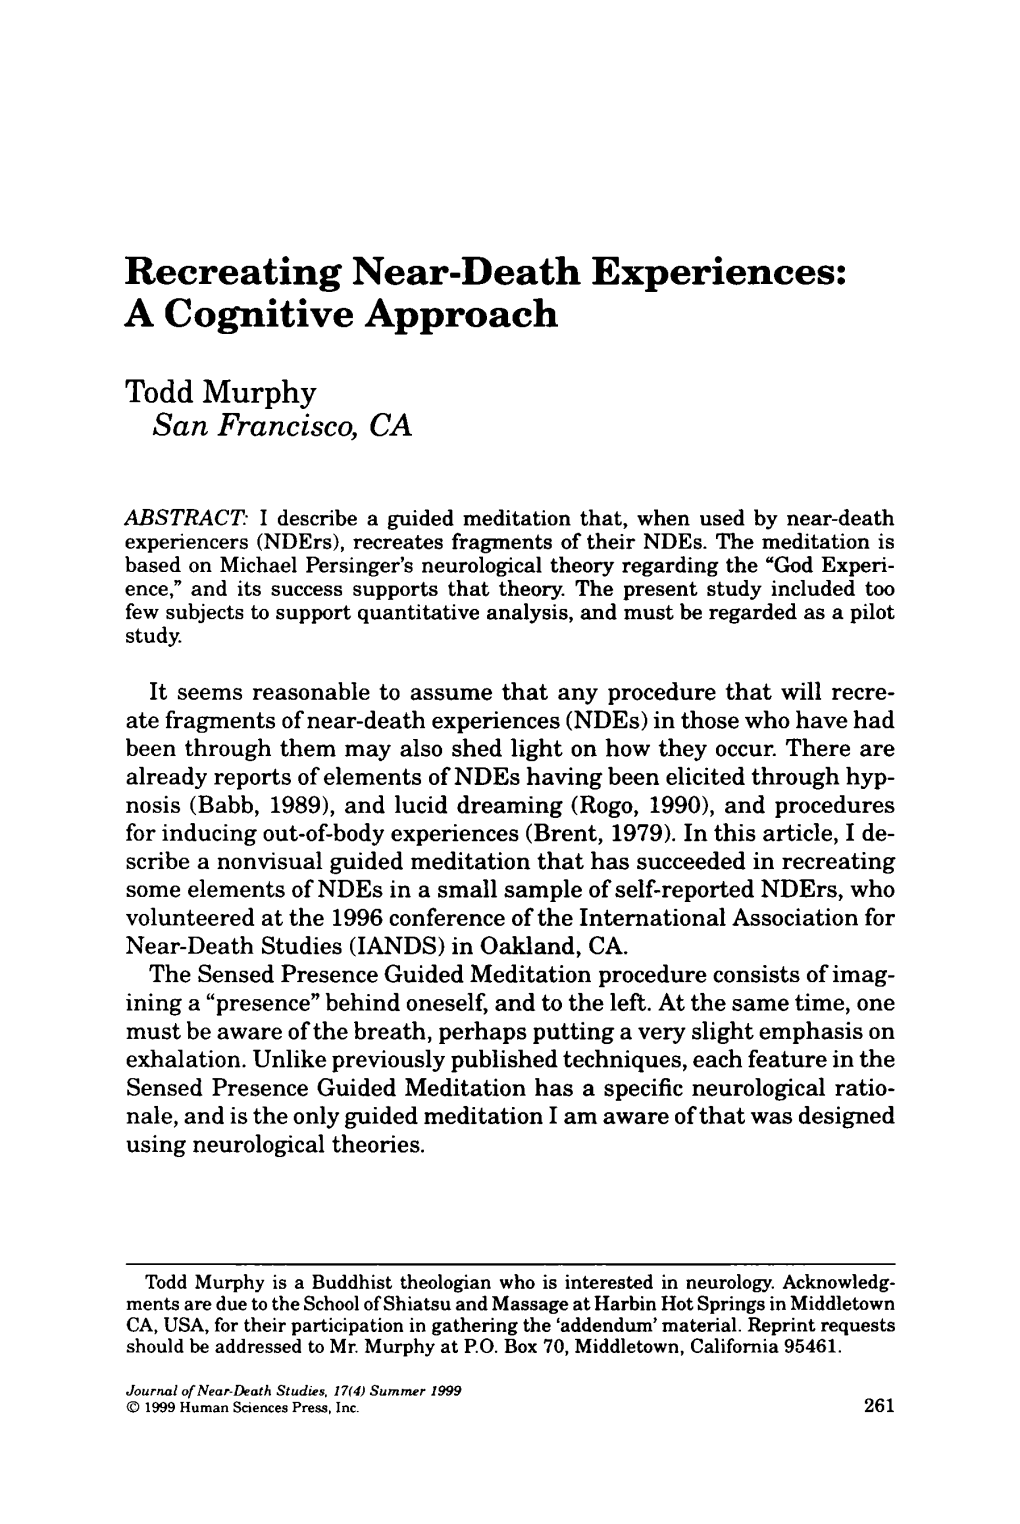 Recreating Near-Death Experiences: a Cognitive Approach